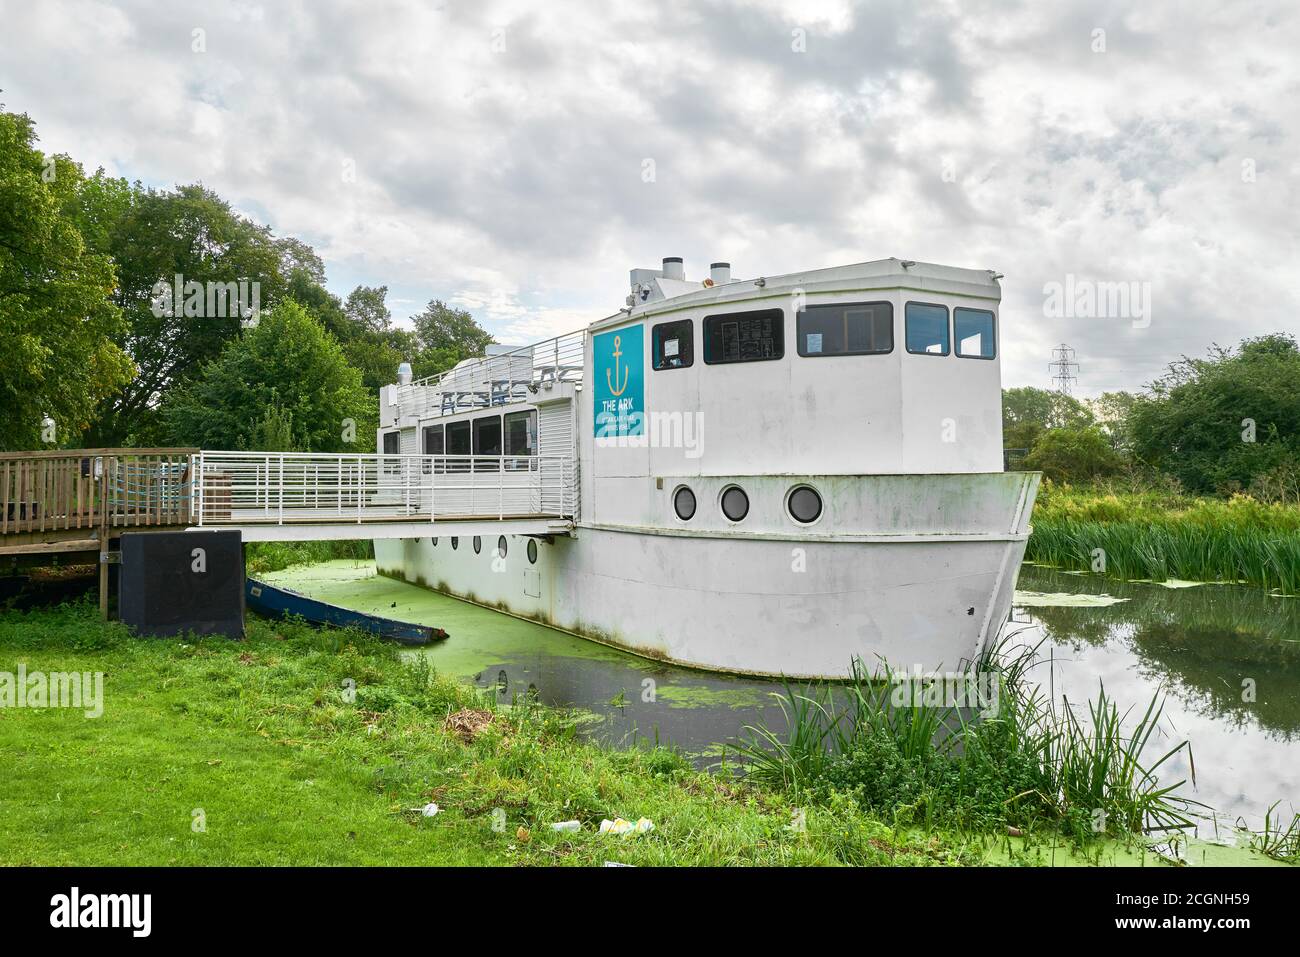 The 'Ark' floating restaurant boat on the river Nene at Midsummer Meadow, Northampton, England, closed due to the coronavirus crisis, August, 2020. Stock Photo